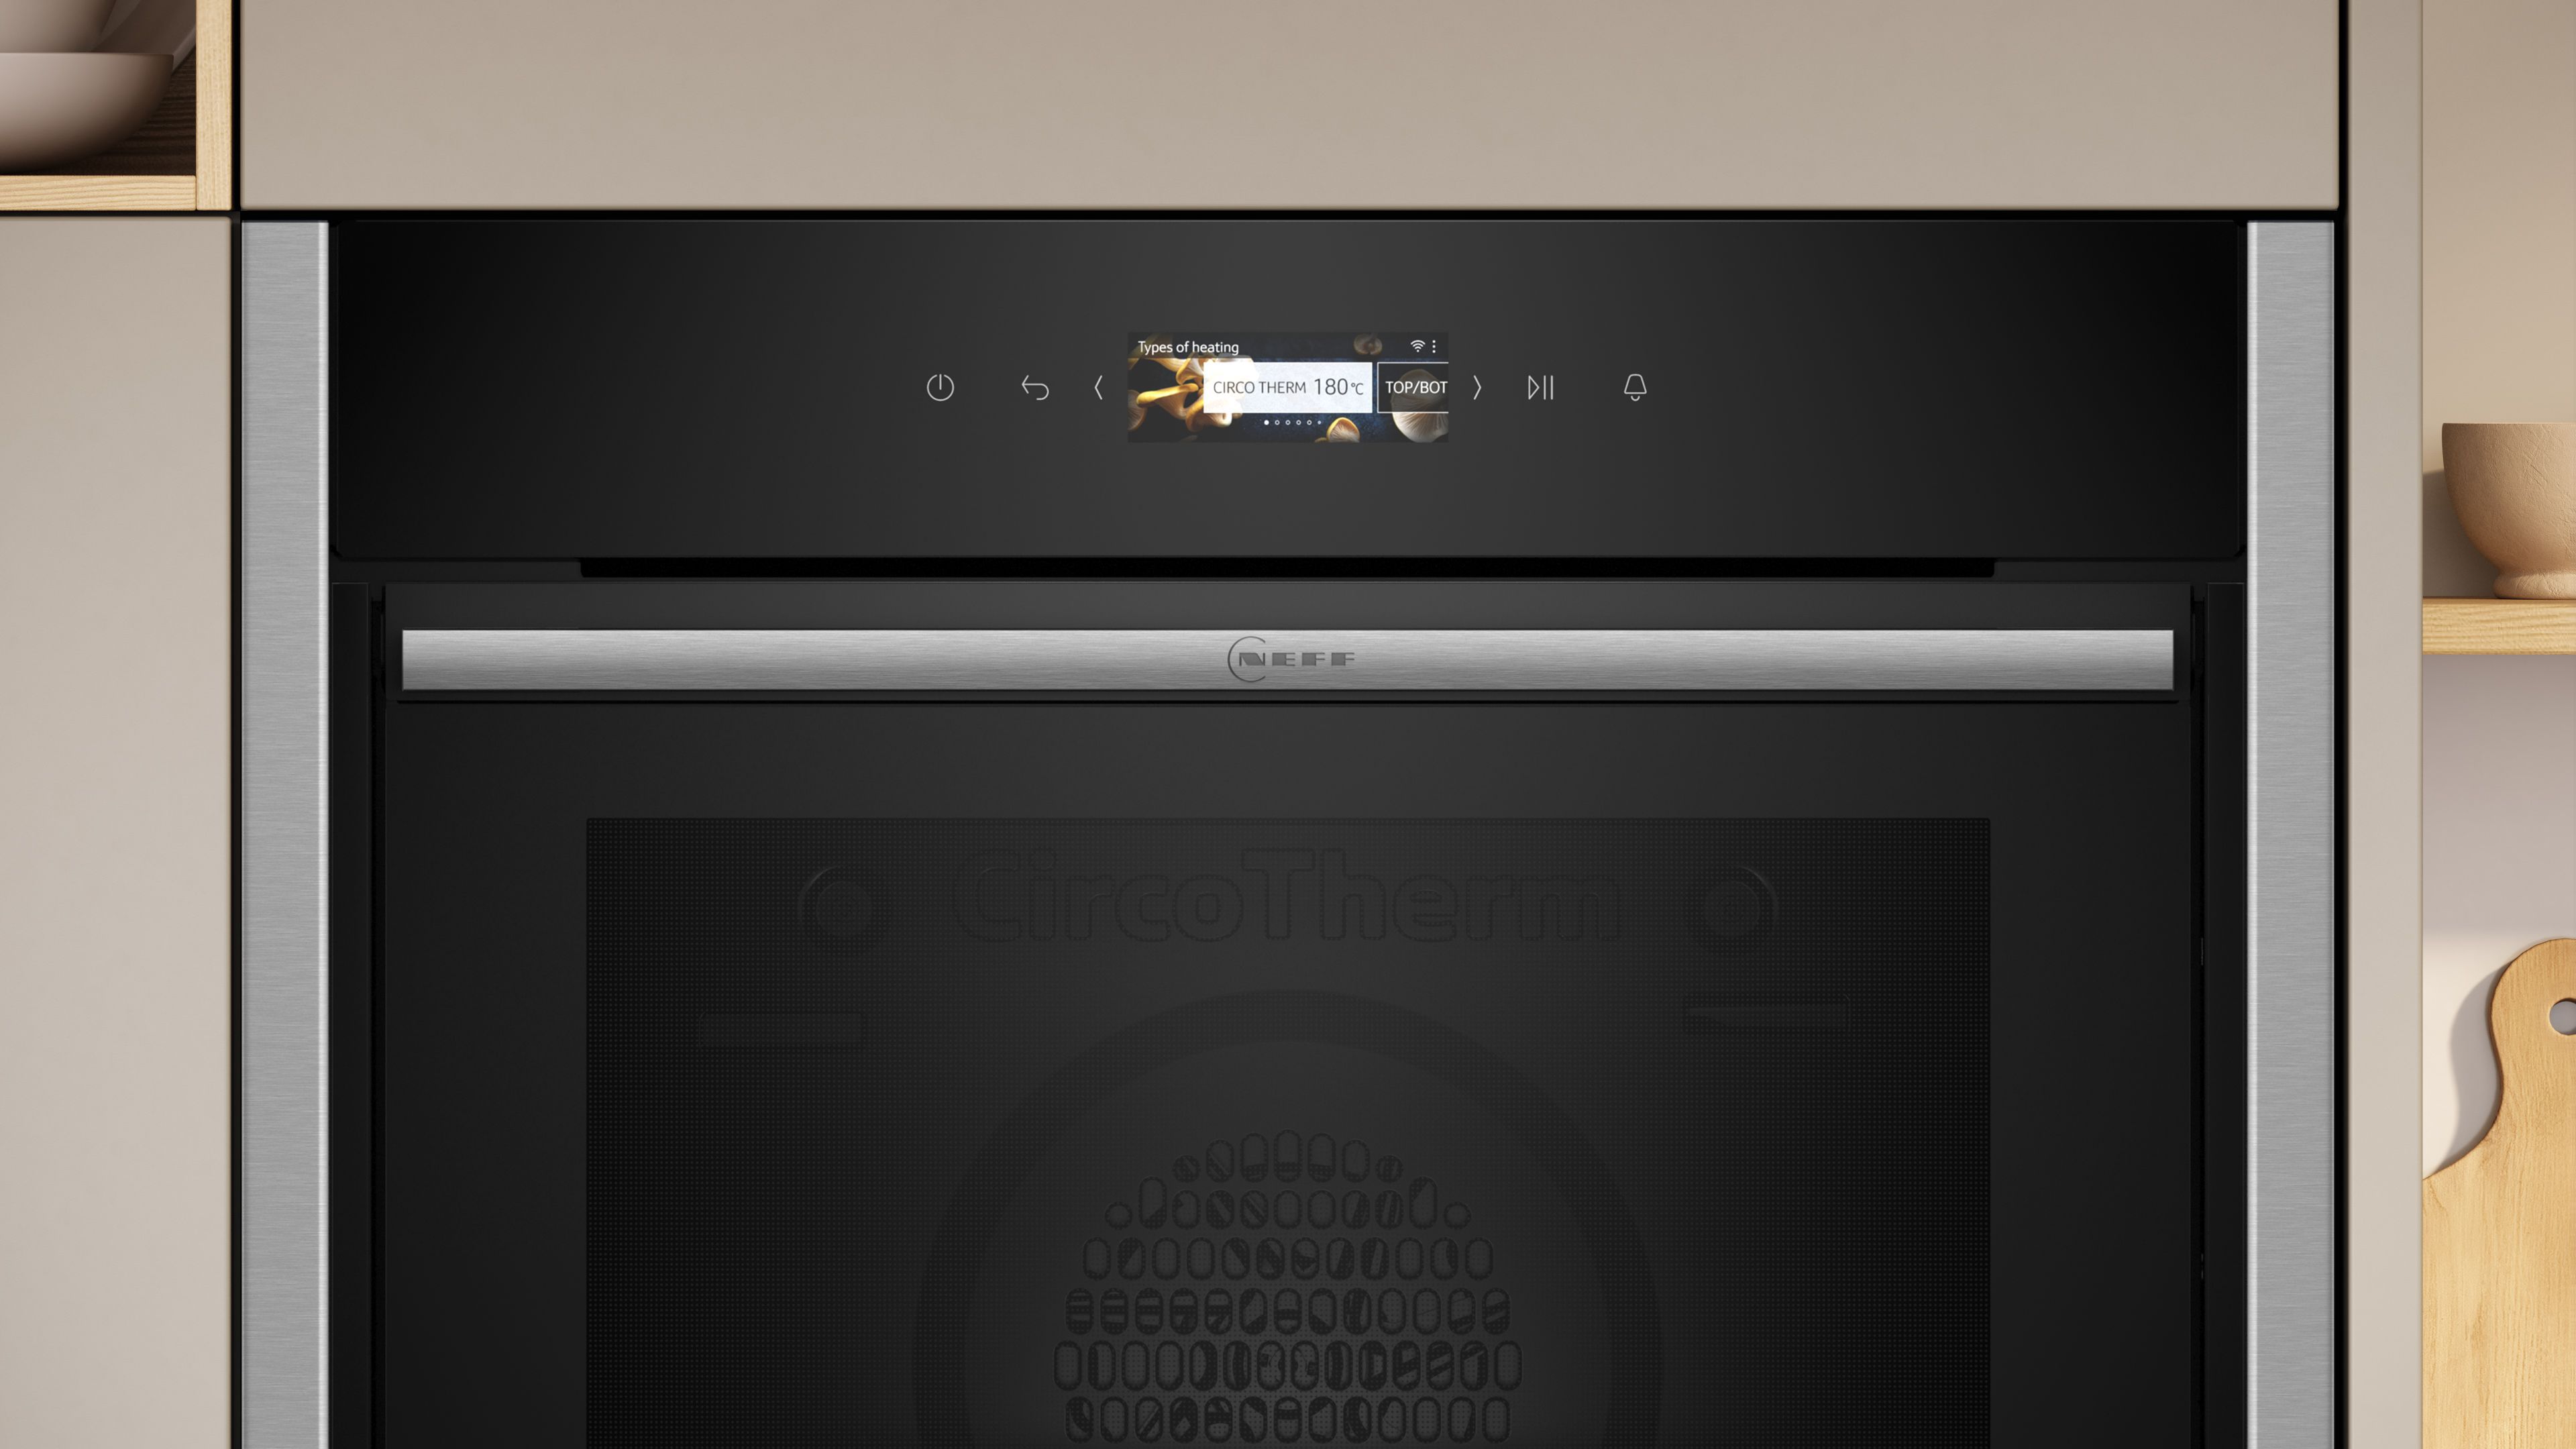 NEFF B54CR31N0B Built-in Single electric multifunction Oven - Black & stainess steel